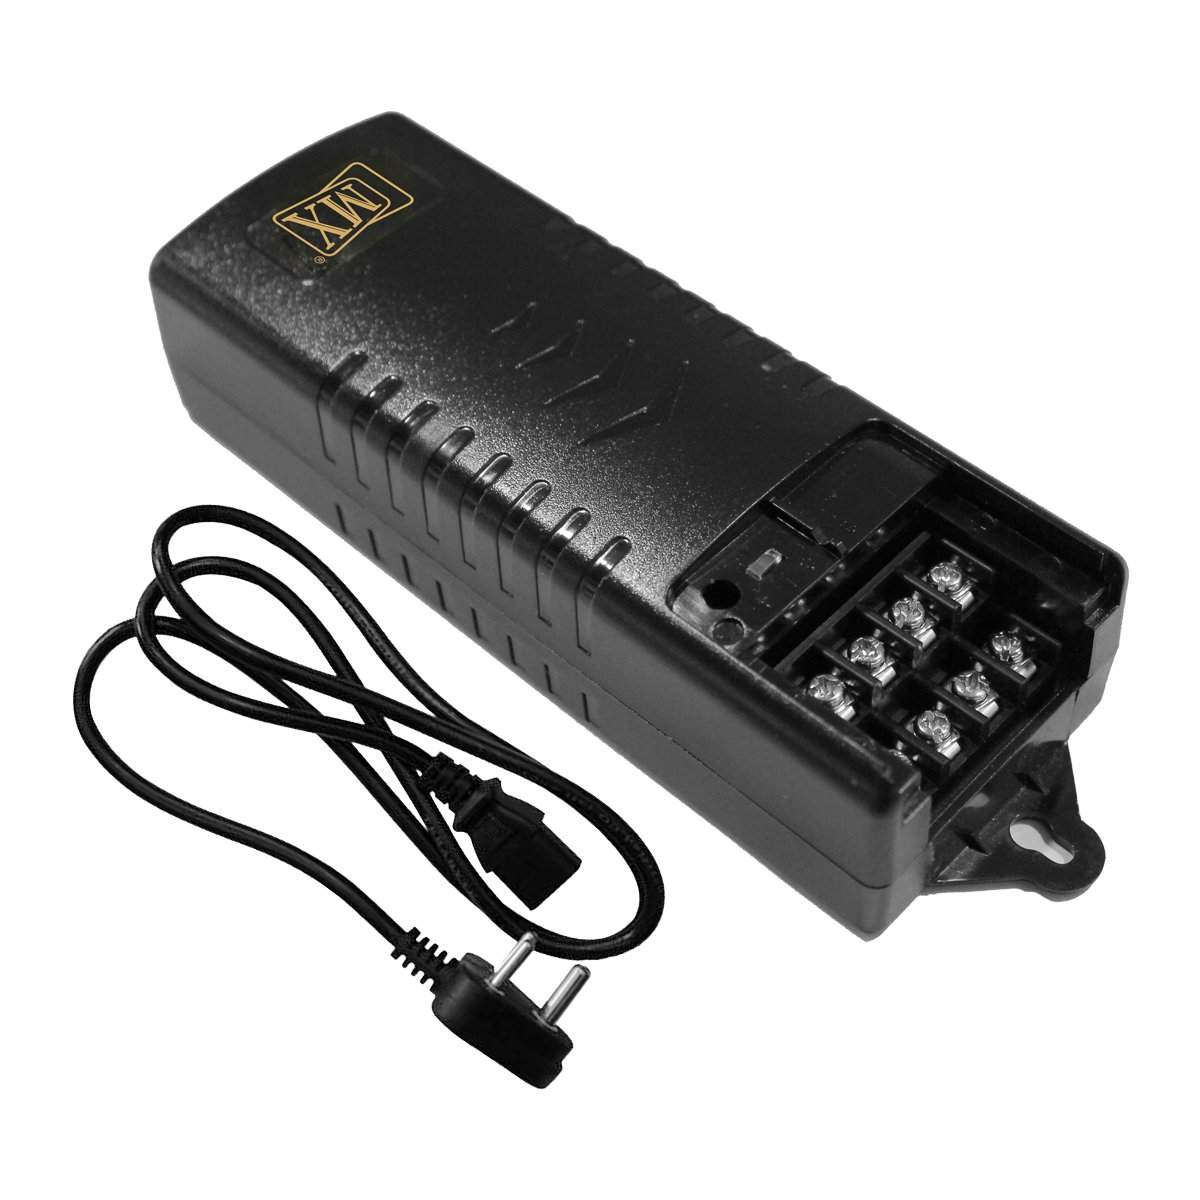 MX CCTV Camera Power Supply 220 Volts AC to 12 Volts DC 5 Amperes